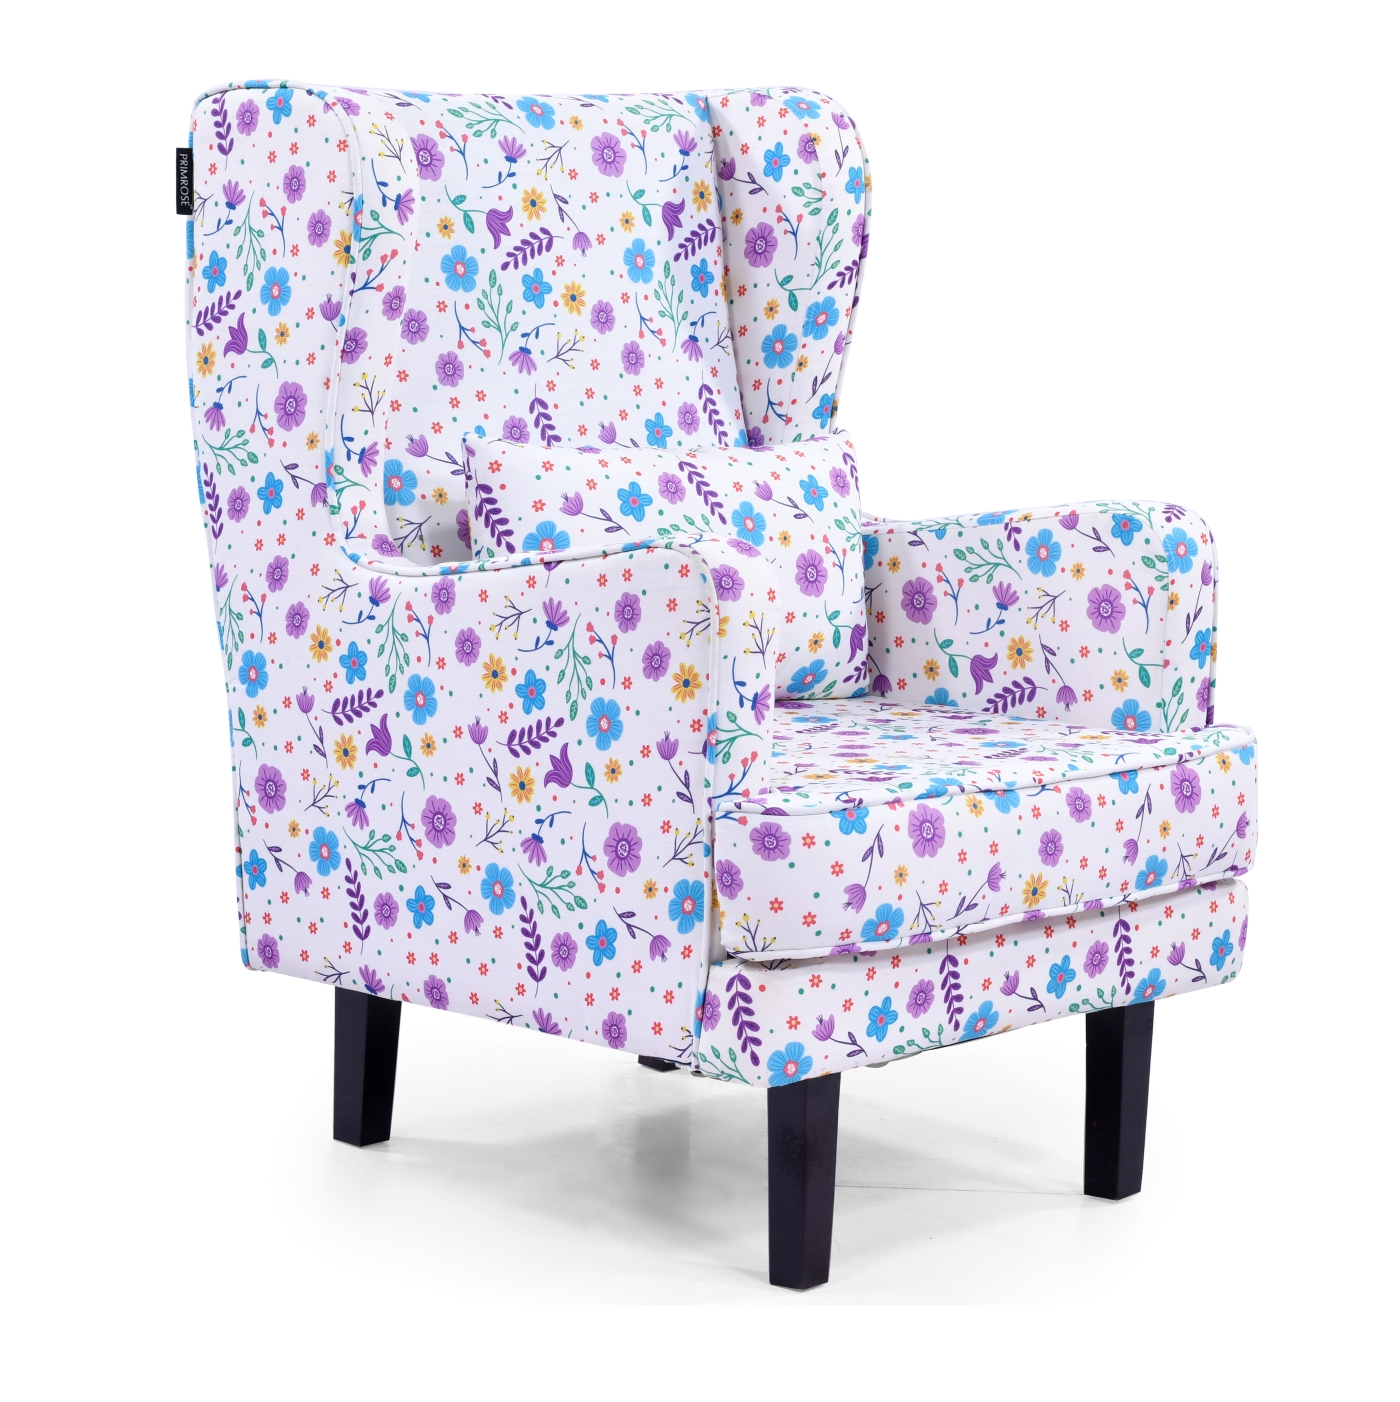 PRIMROSE Aster Flower Digital Printed Faux Linen Fabric High Back Wing Chair - White, Violet  